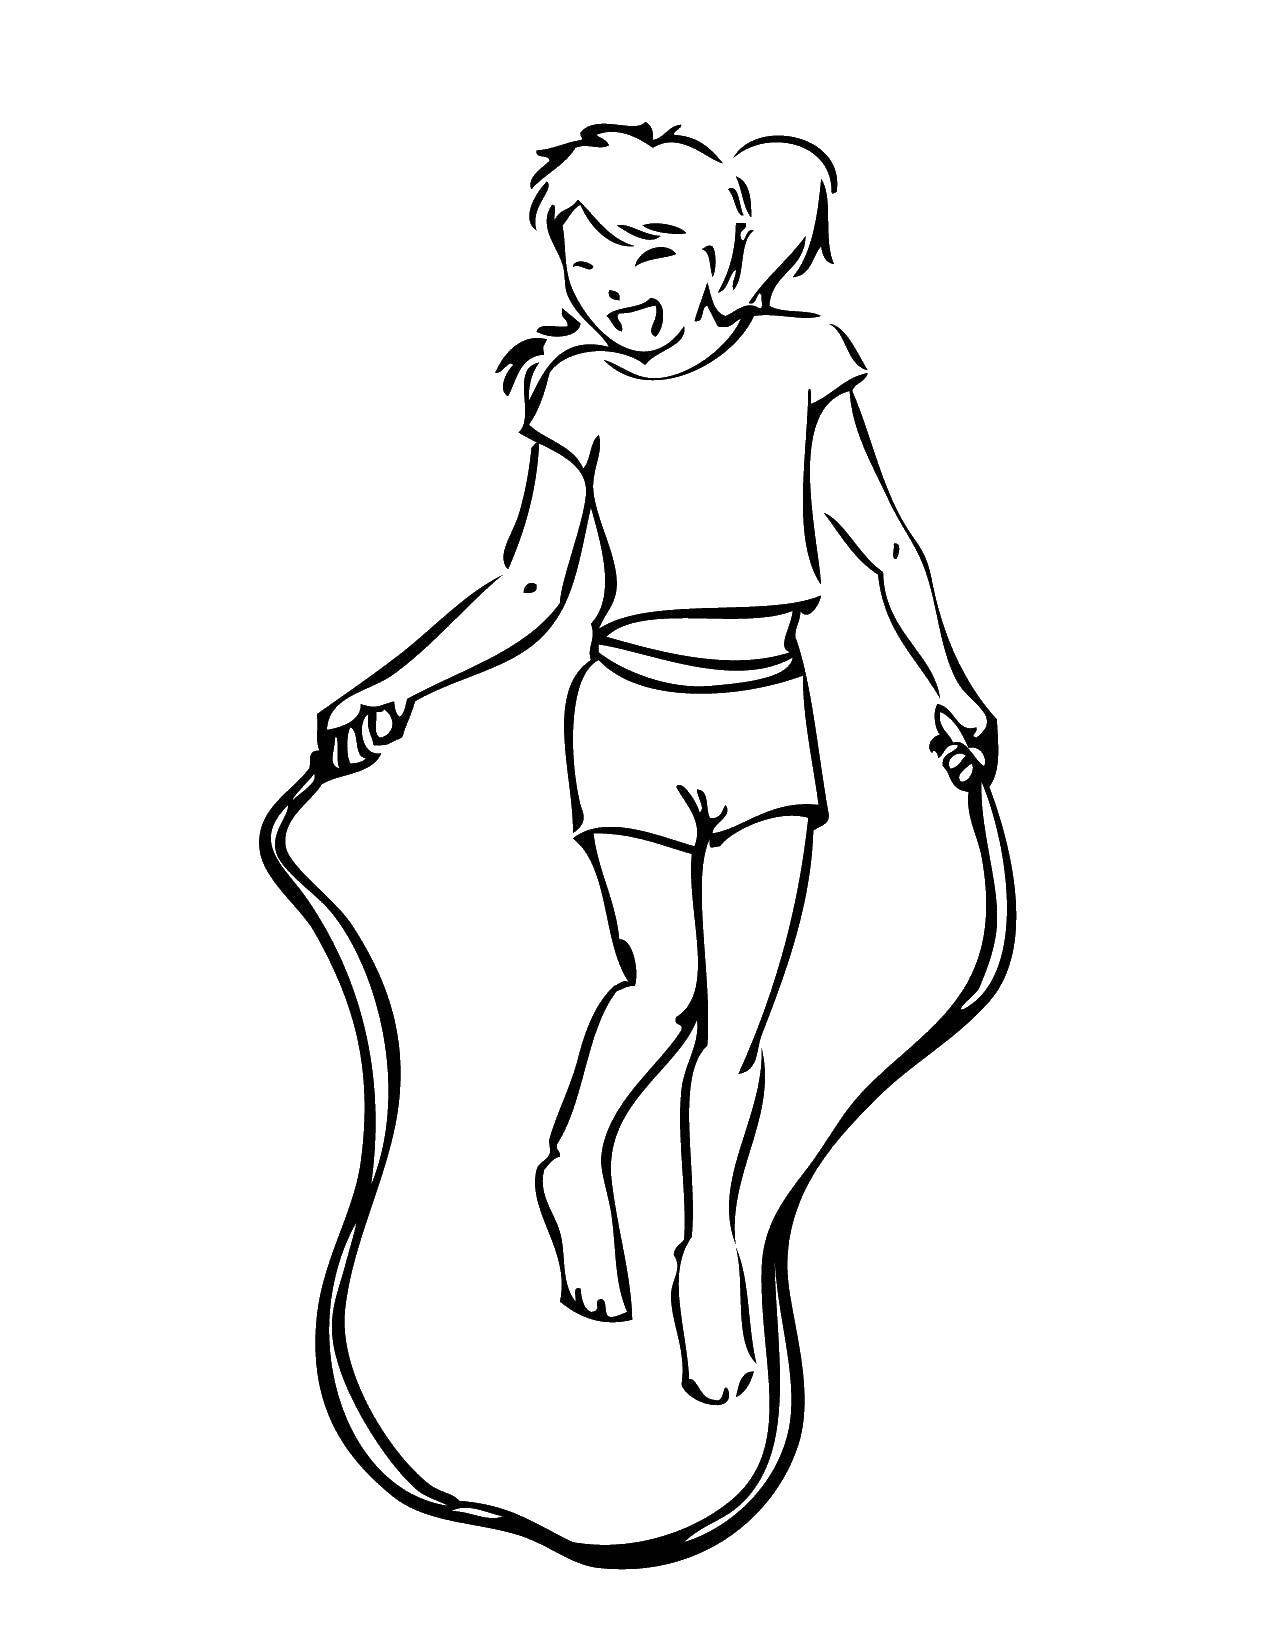 Coloring Jump rope. Category Sports. Tags:  Sports, jump rope.